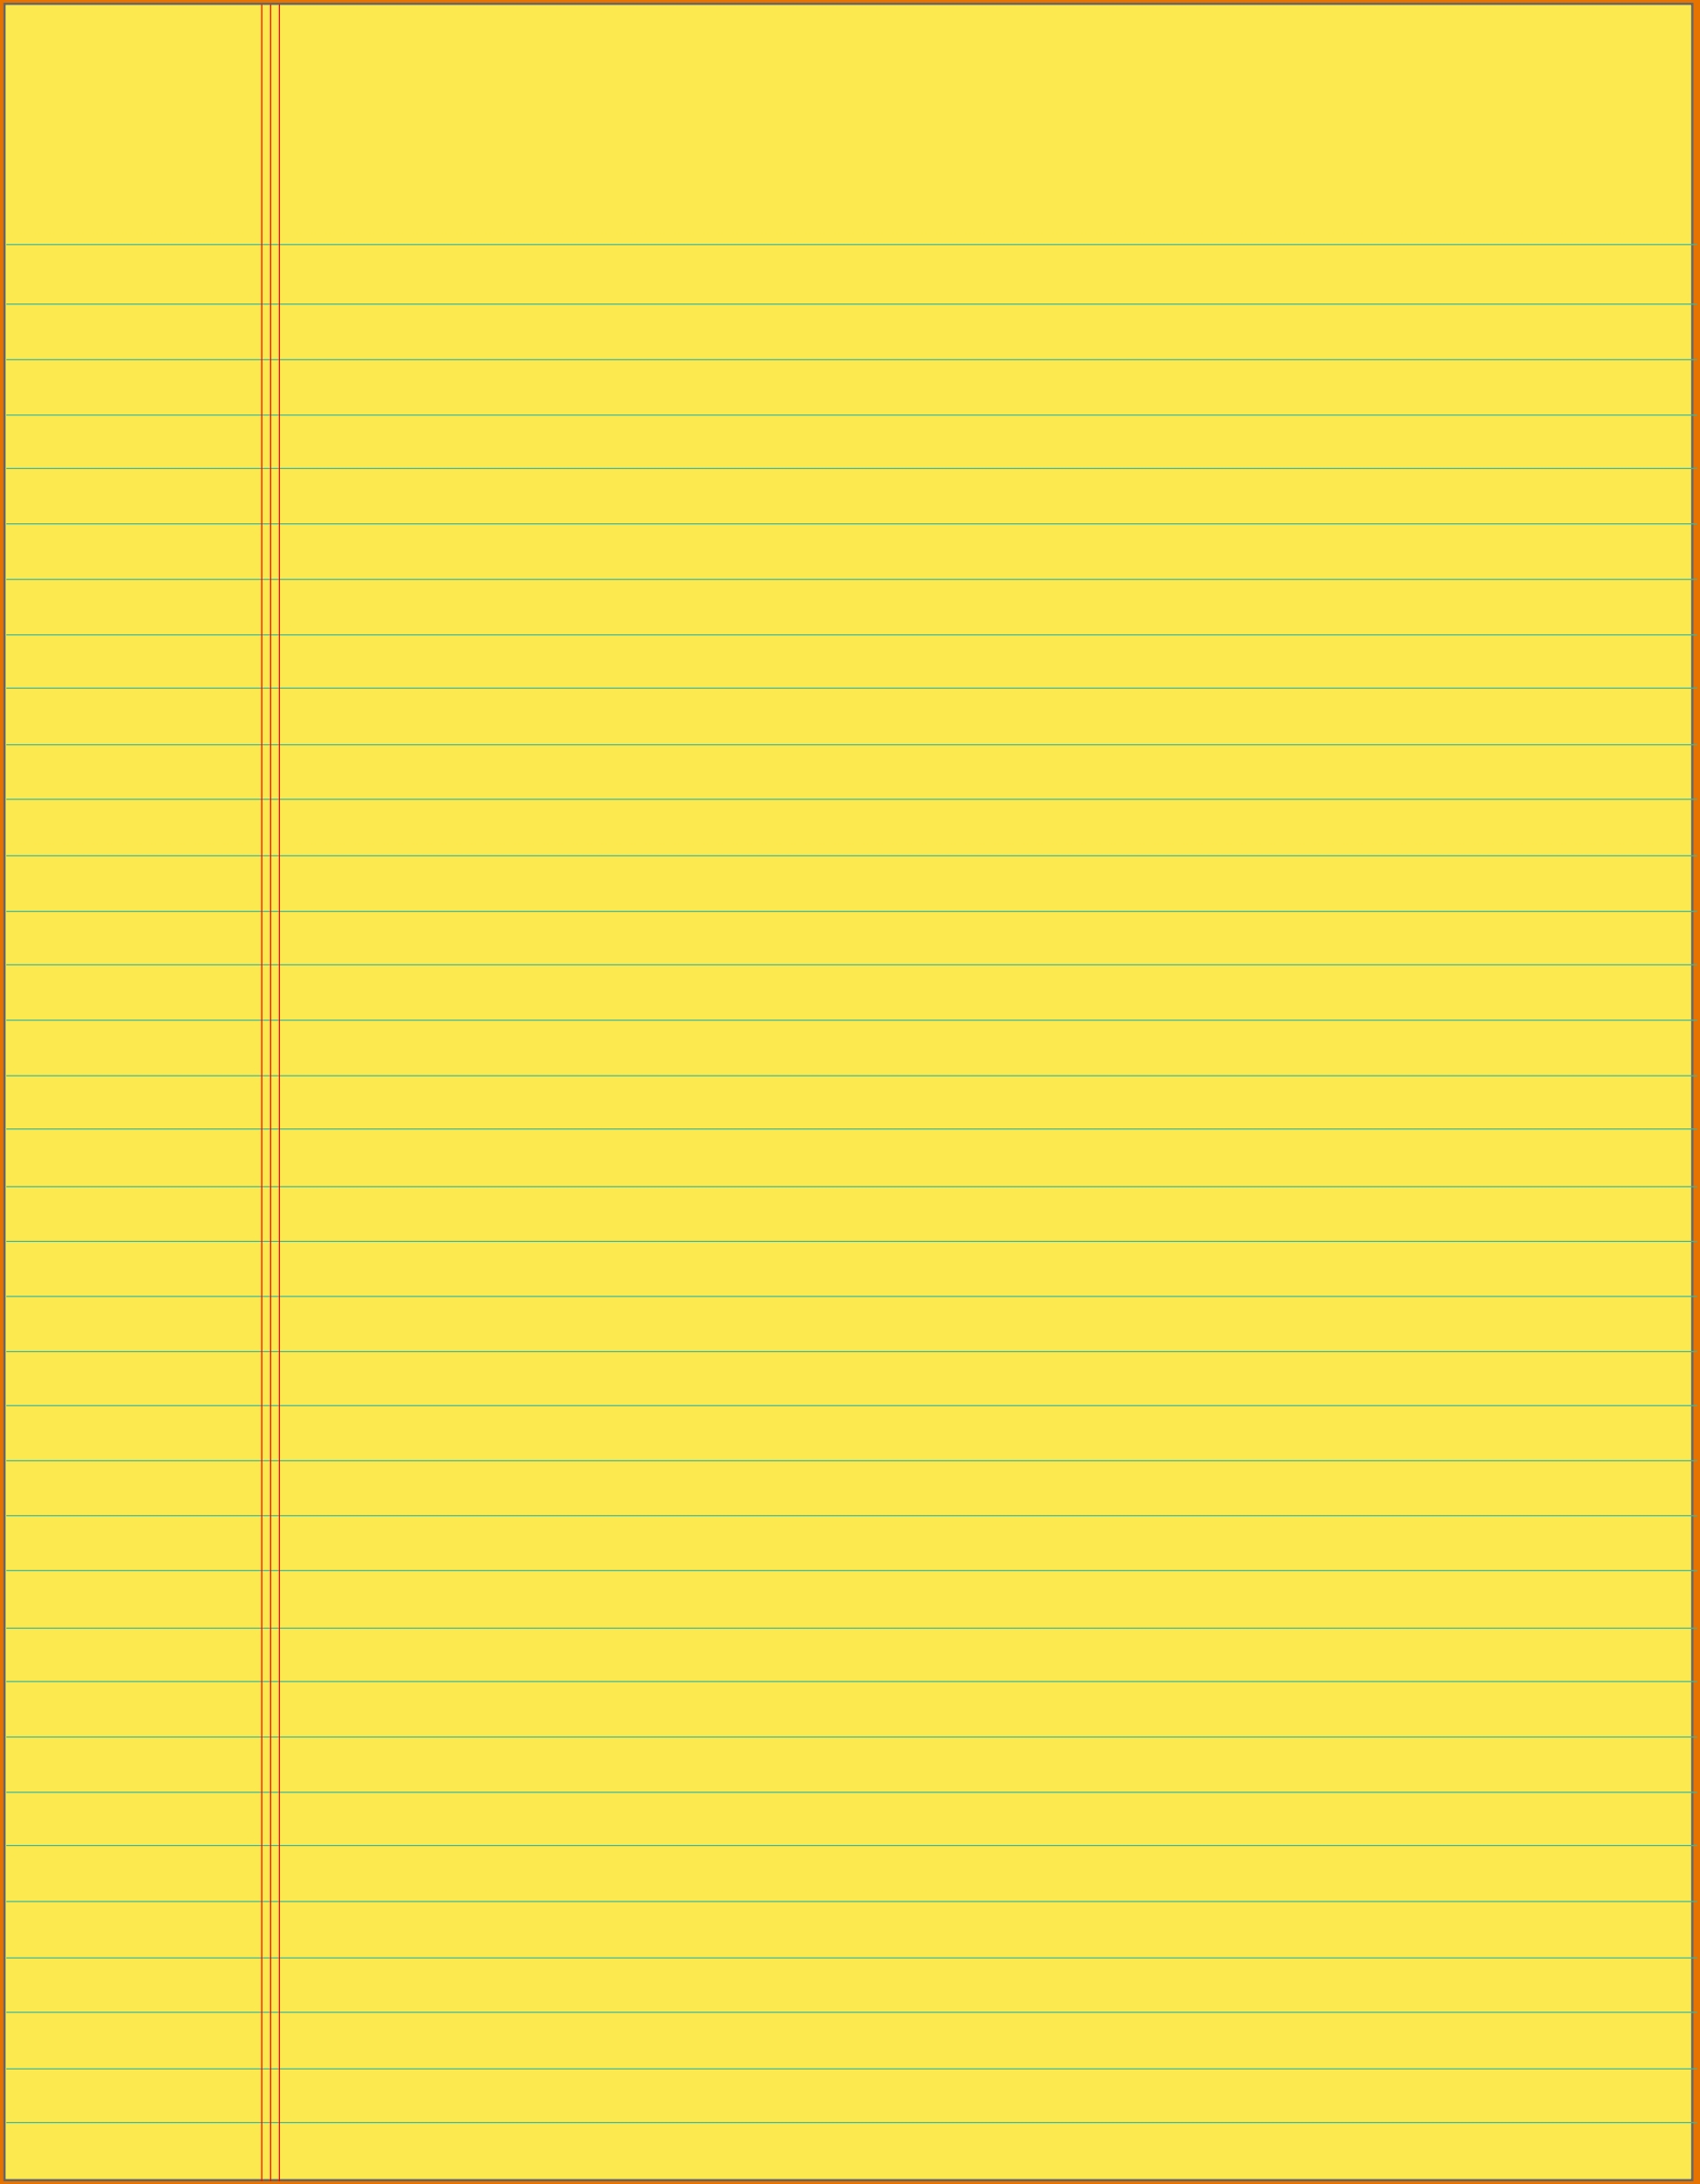 Yellow Lined Paper Template